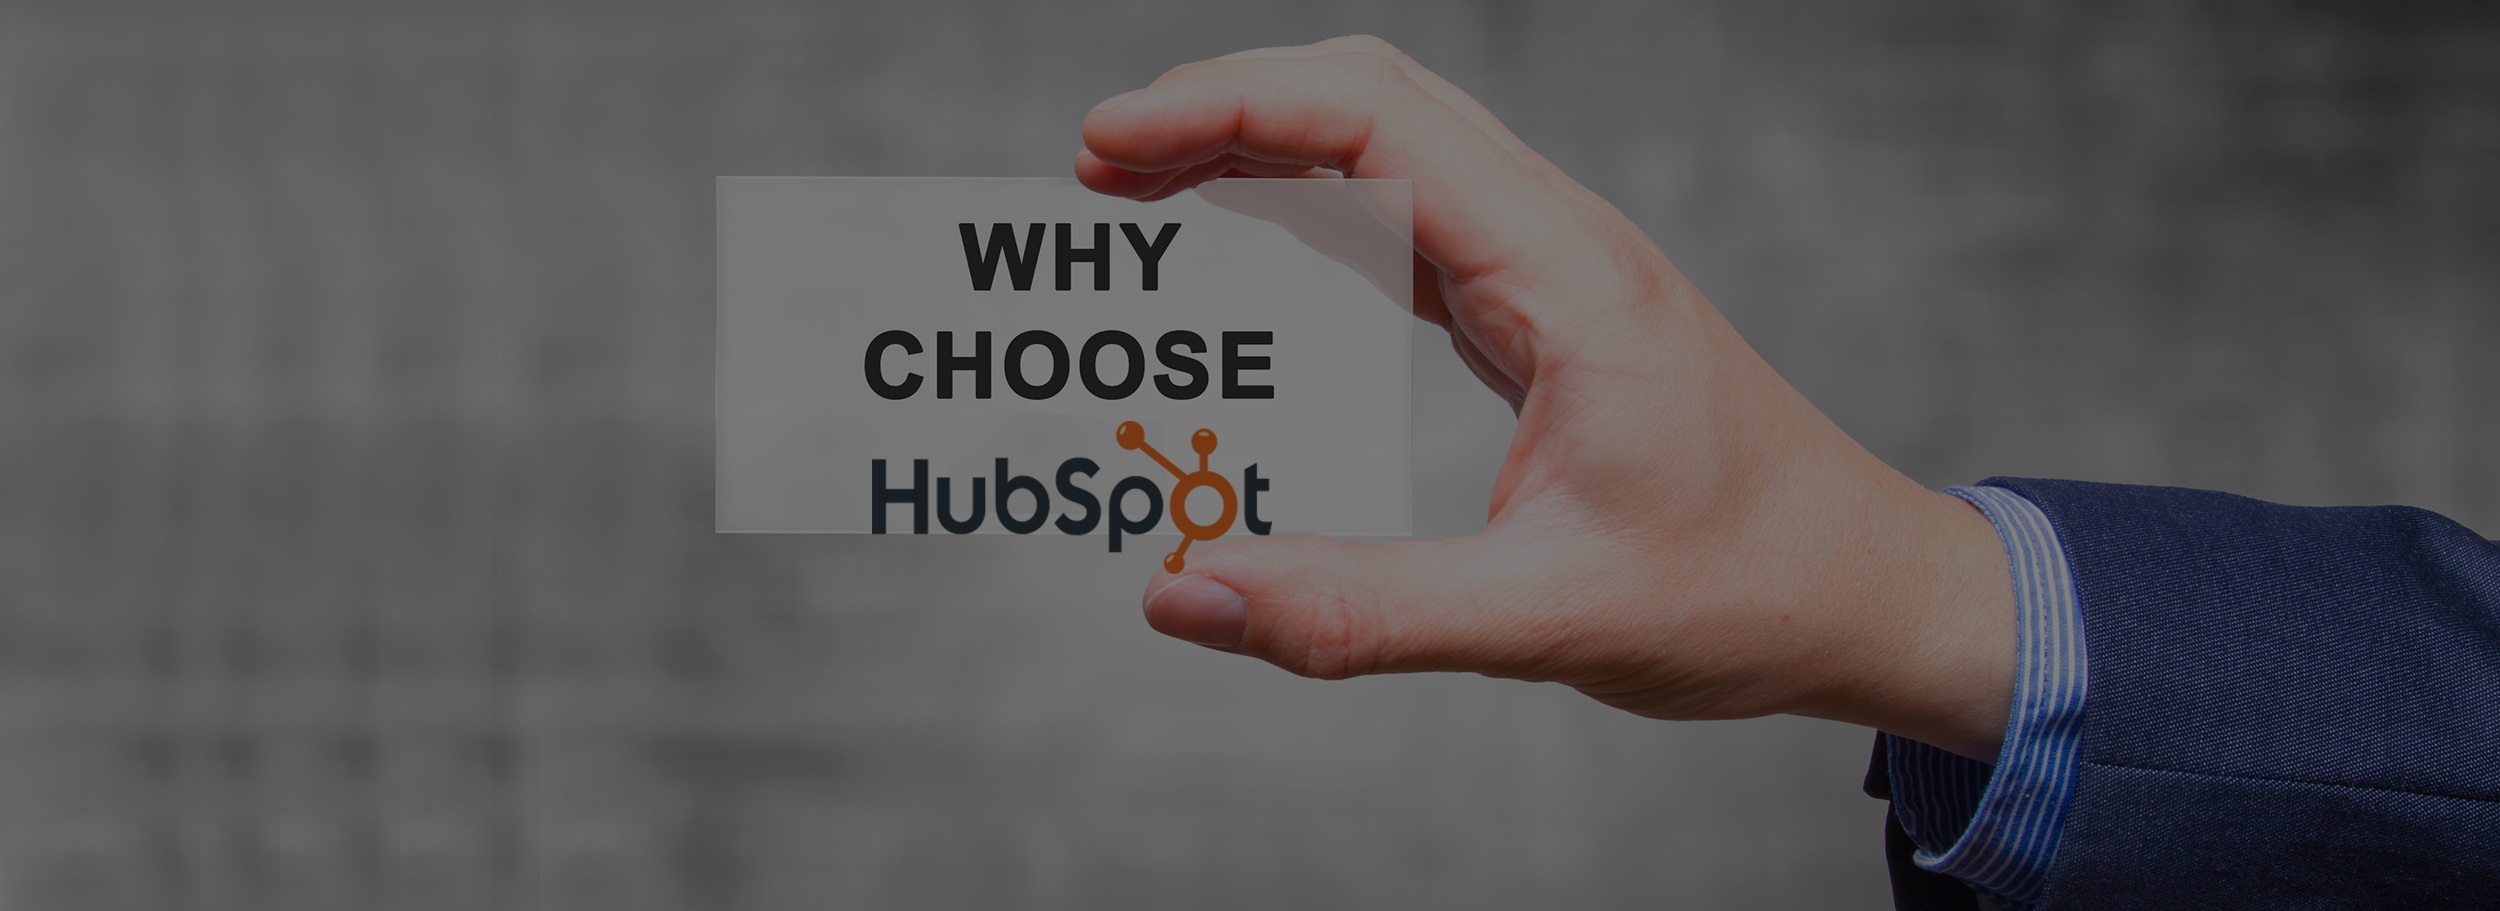 Why we chose hubspot as our marketing automation tool.jpg